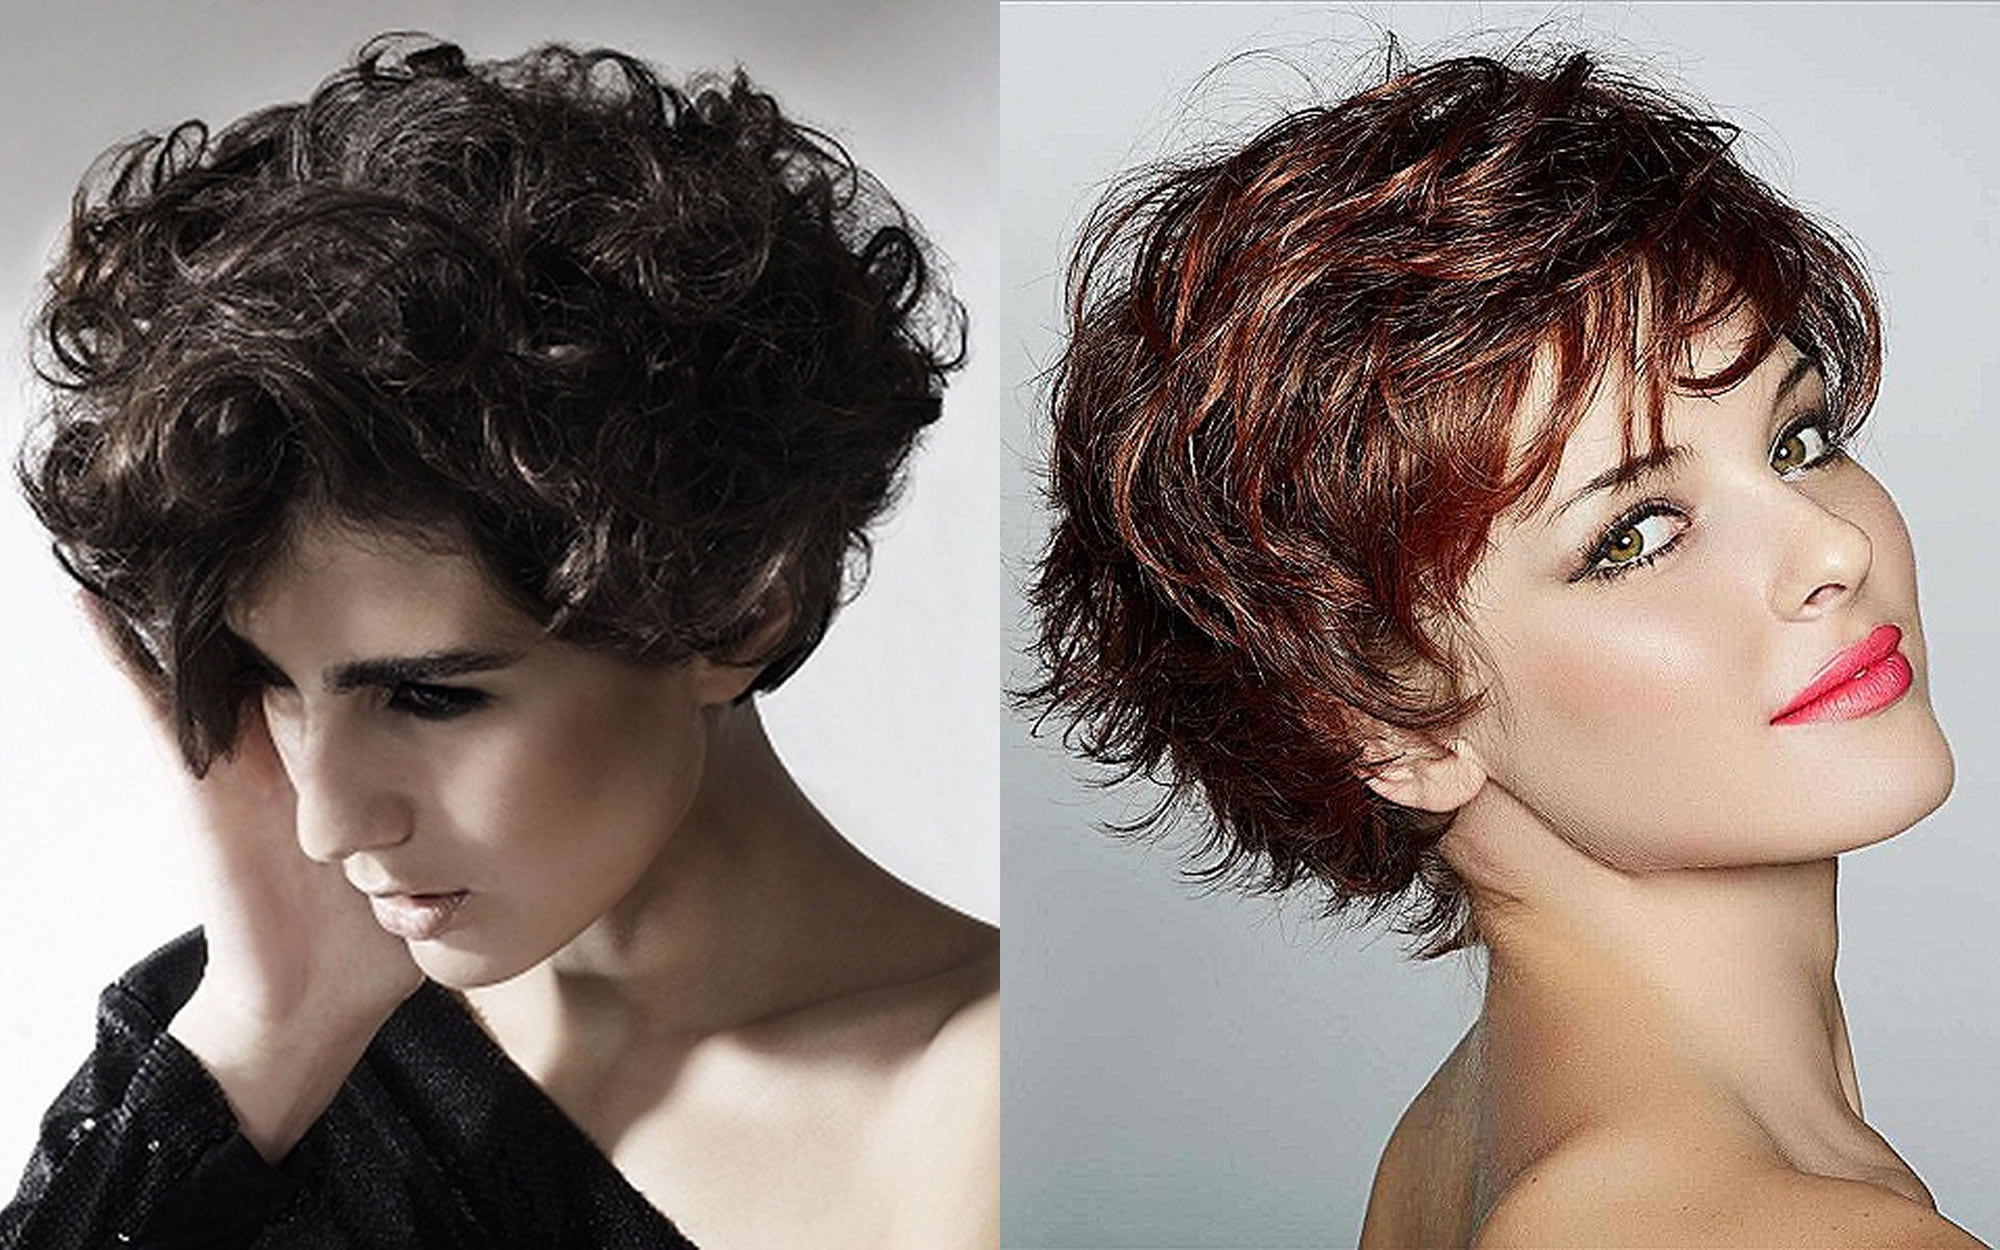 Hairstyles For Short Curly Hair Short Hairstyles 2018 2019 Most ...